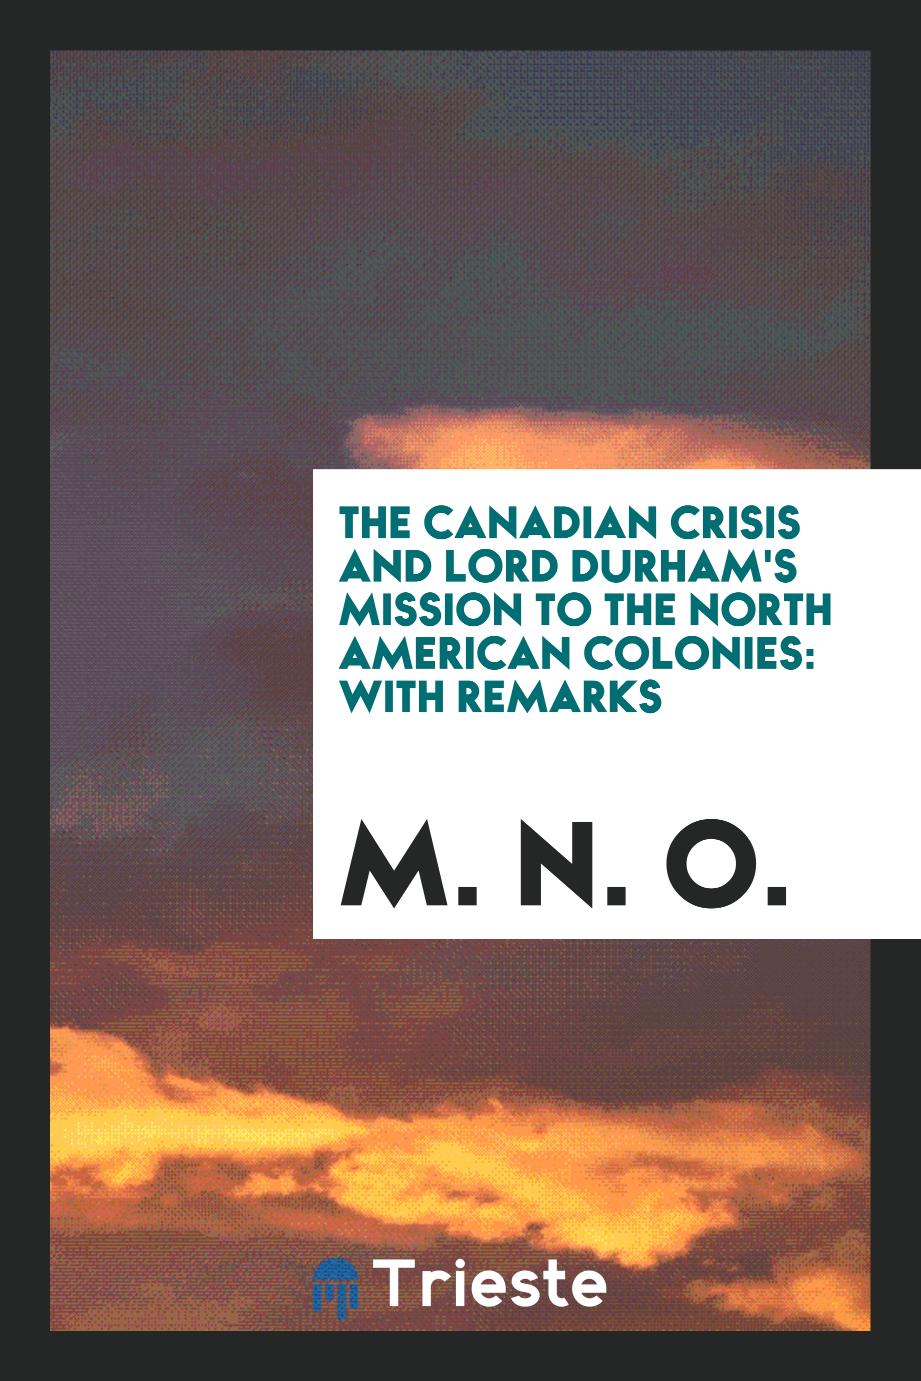 The Canadian Crisis and Lord Durham's Mission to the North American Colonies: with remarks